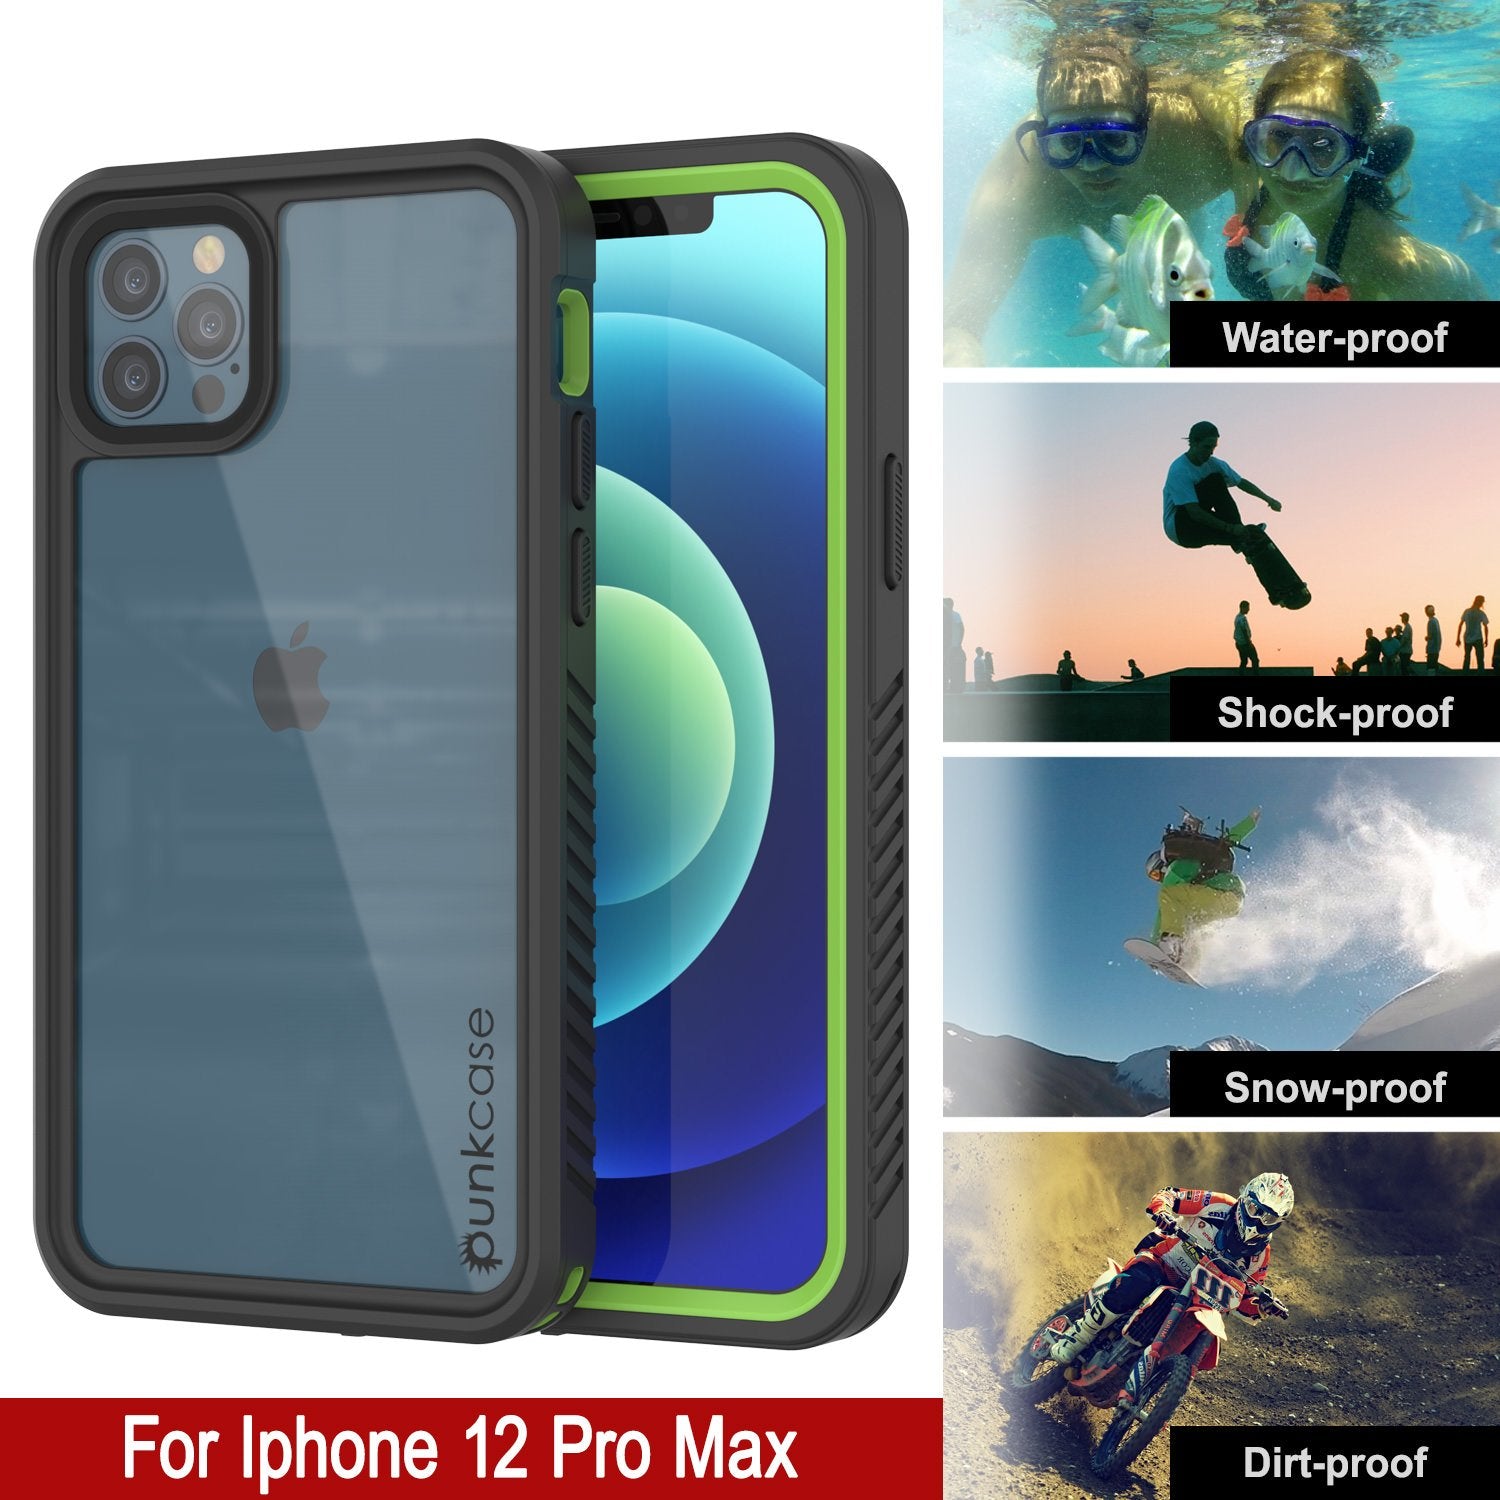 iPhone 12 Pro Max Waterproof Case, Punkcase [Extreme Series] Armor Cover W/ Built In Screen Protector [Light Green]